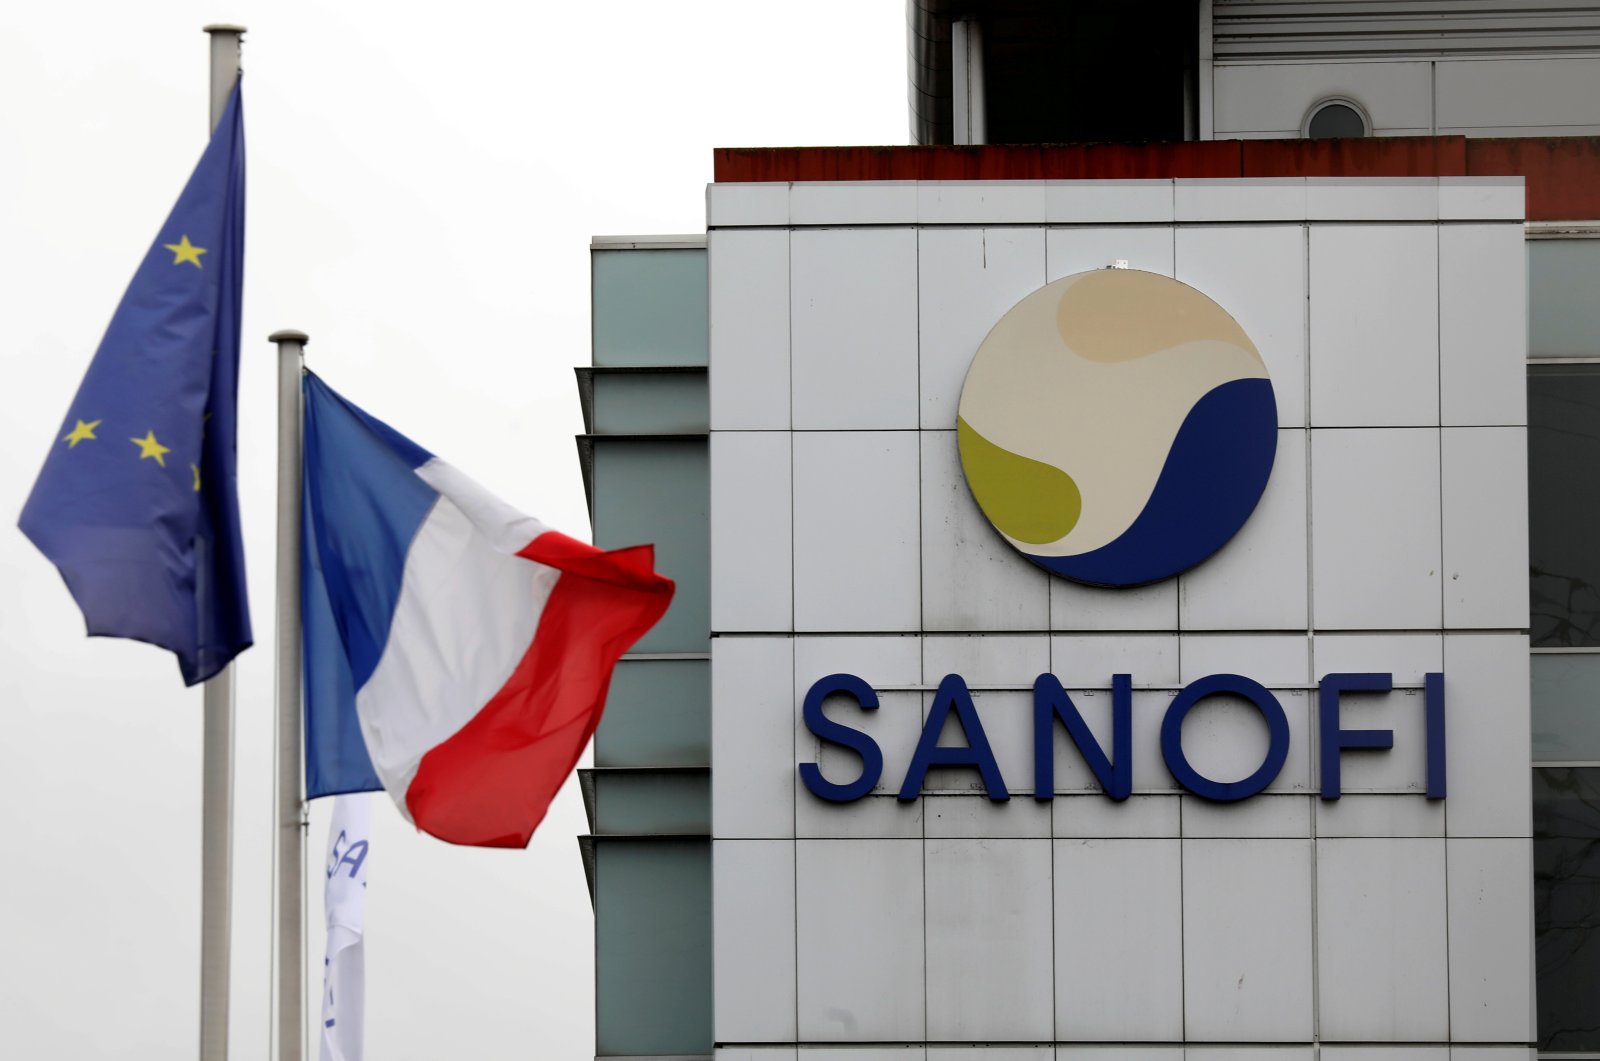 The logo of Sanofi is seen at the company's research and production center in Vitry-sur-Seine, France, Aug. 6, 2019. (Reuters Photo)